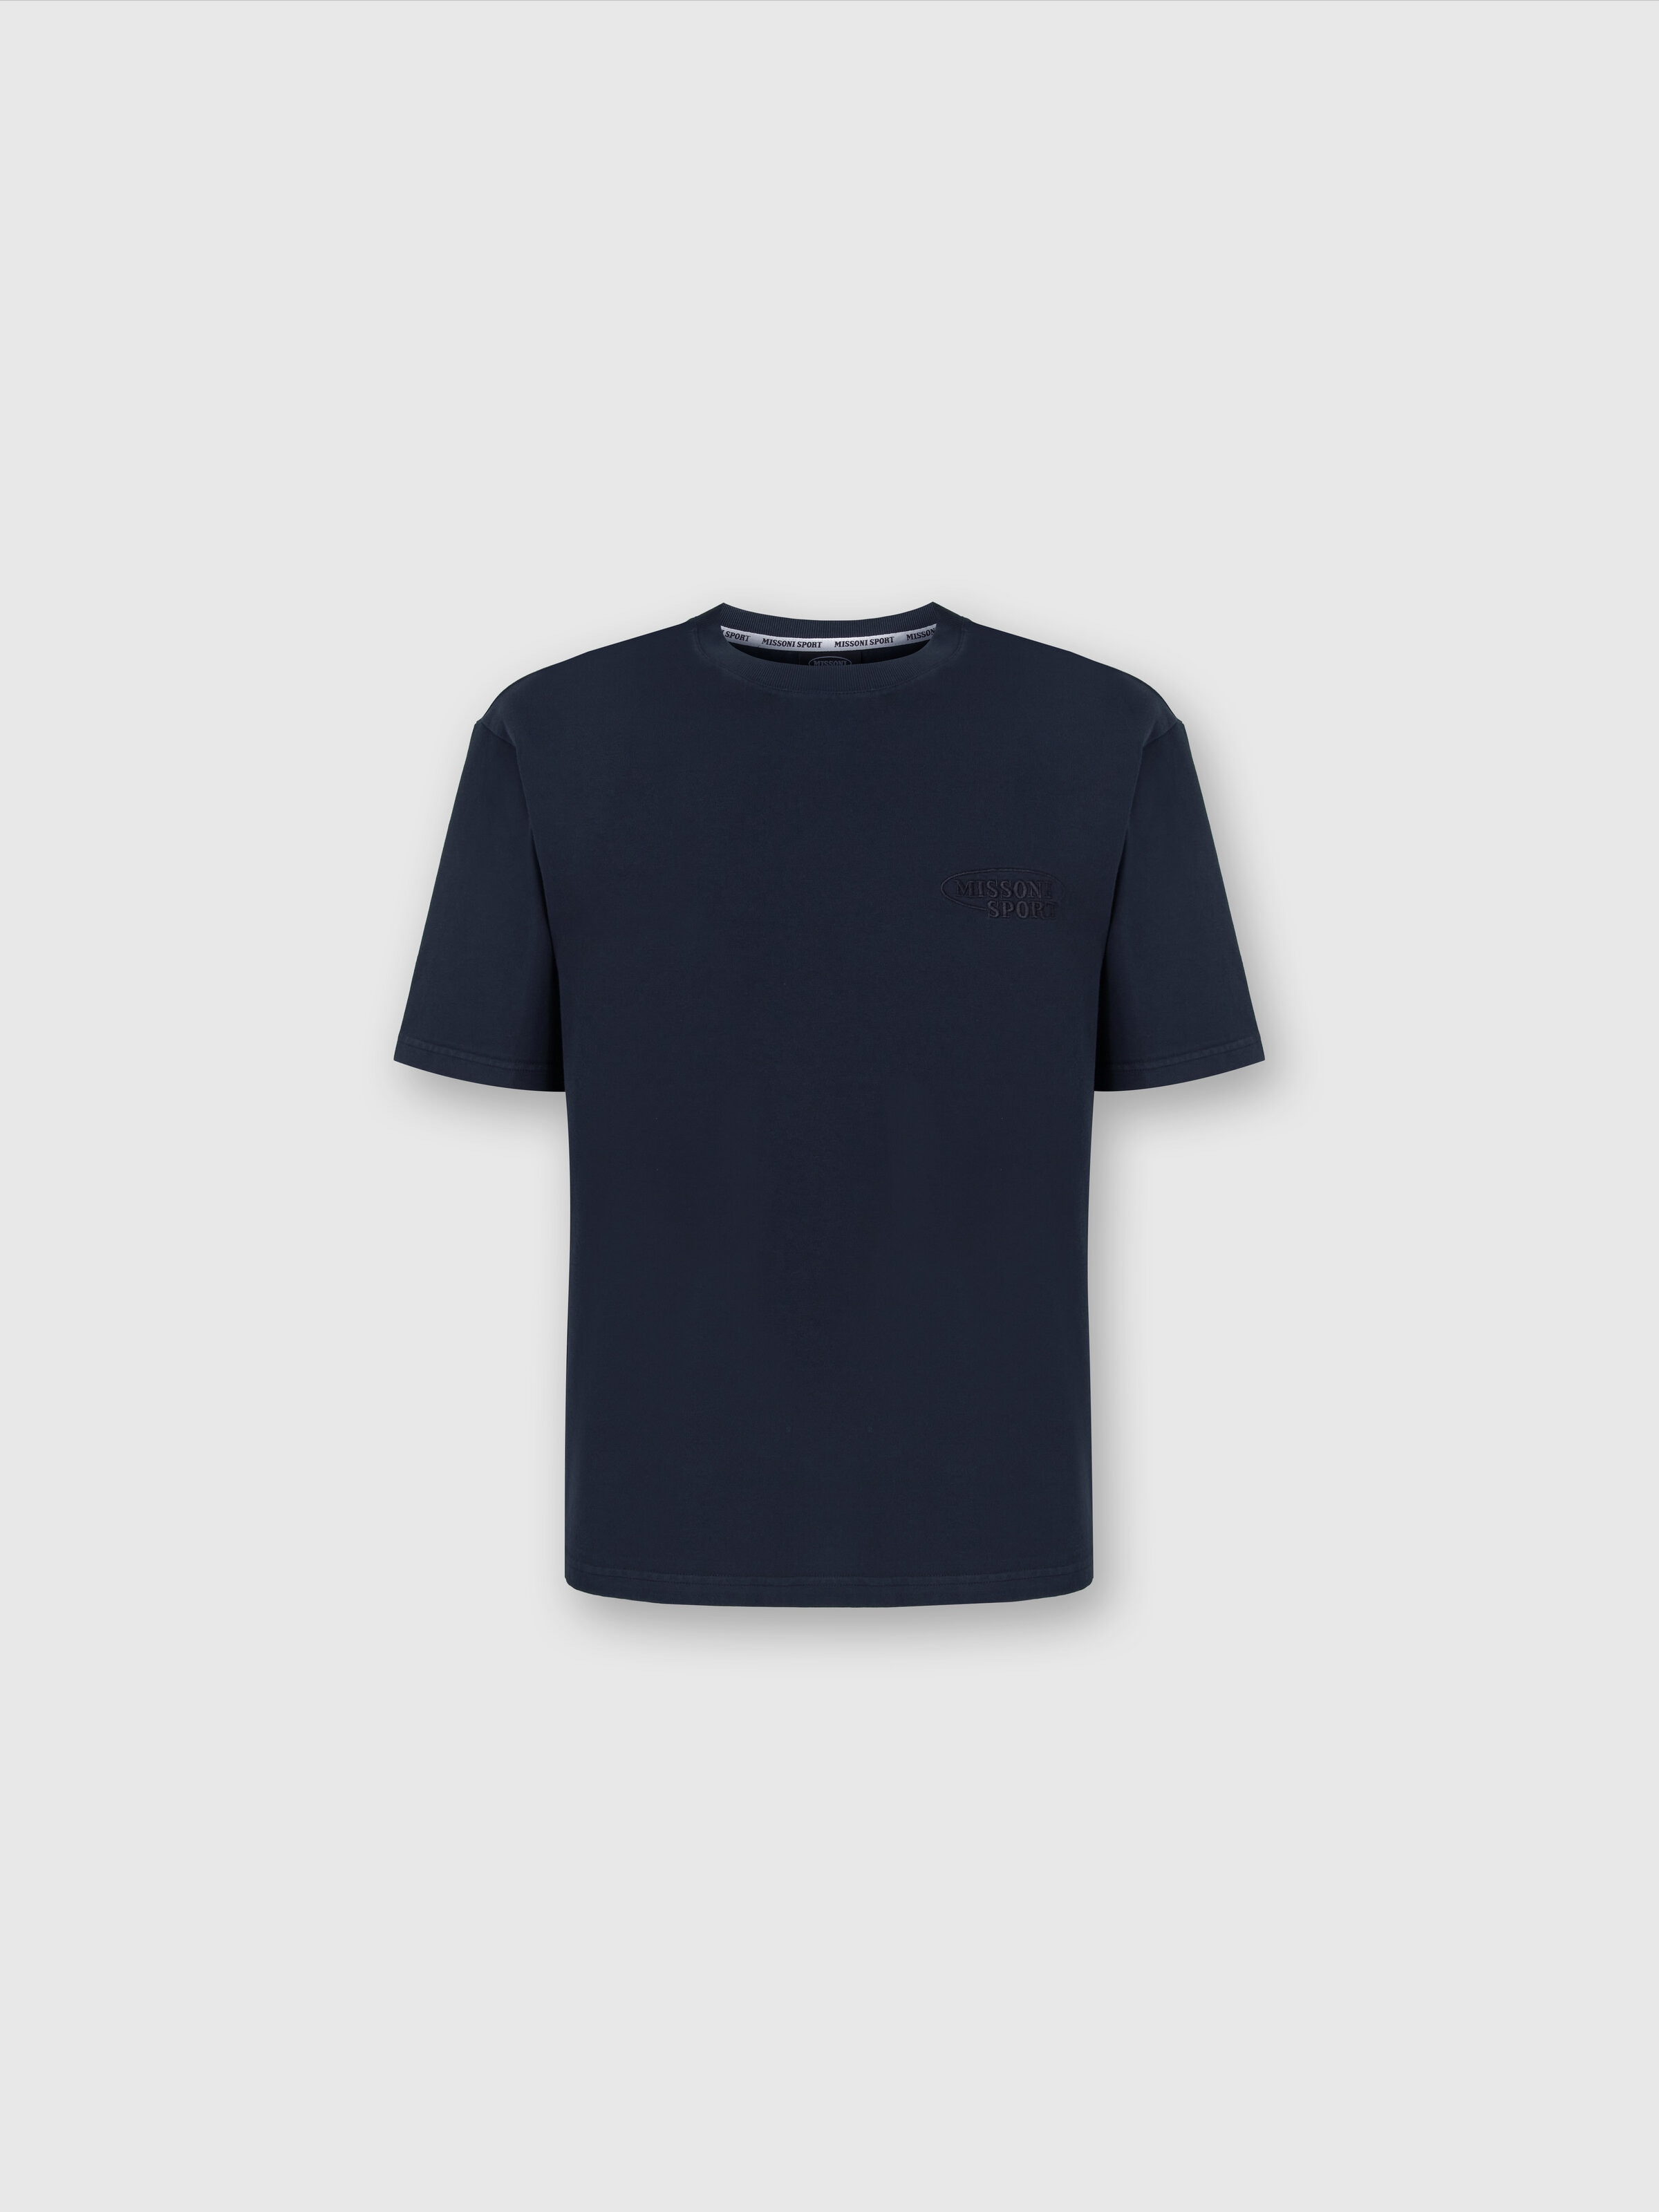 Crew-neck T-shirt in cotton with logo, Navy Blue  - 0